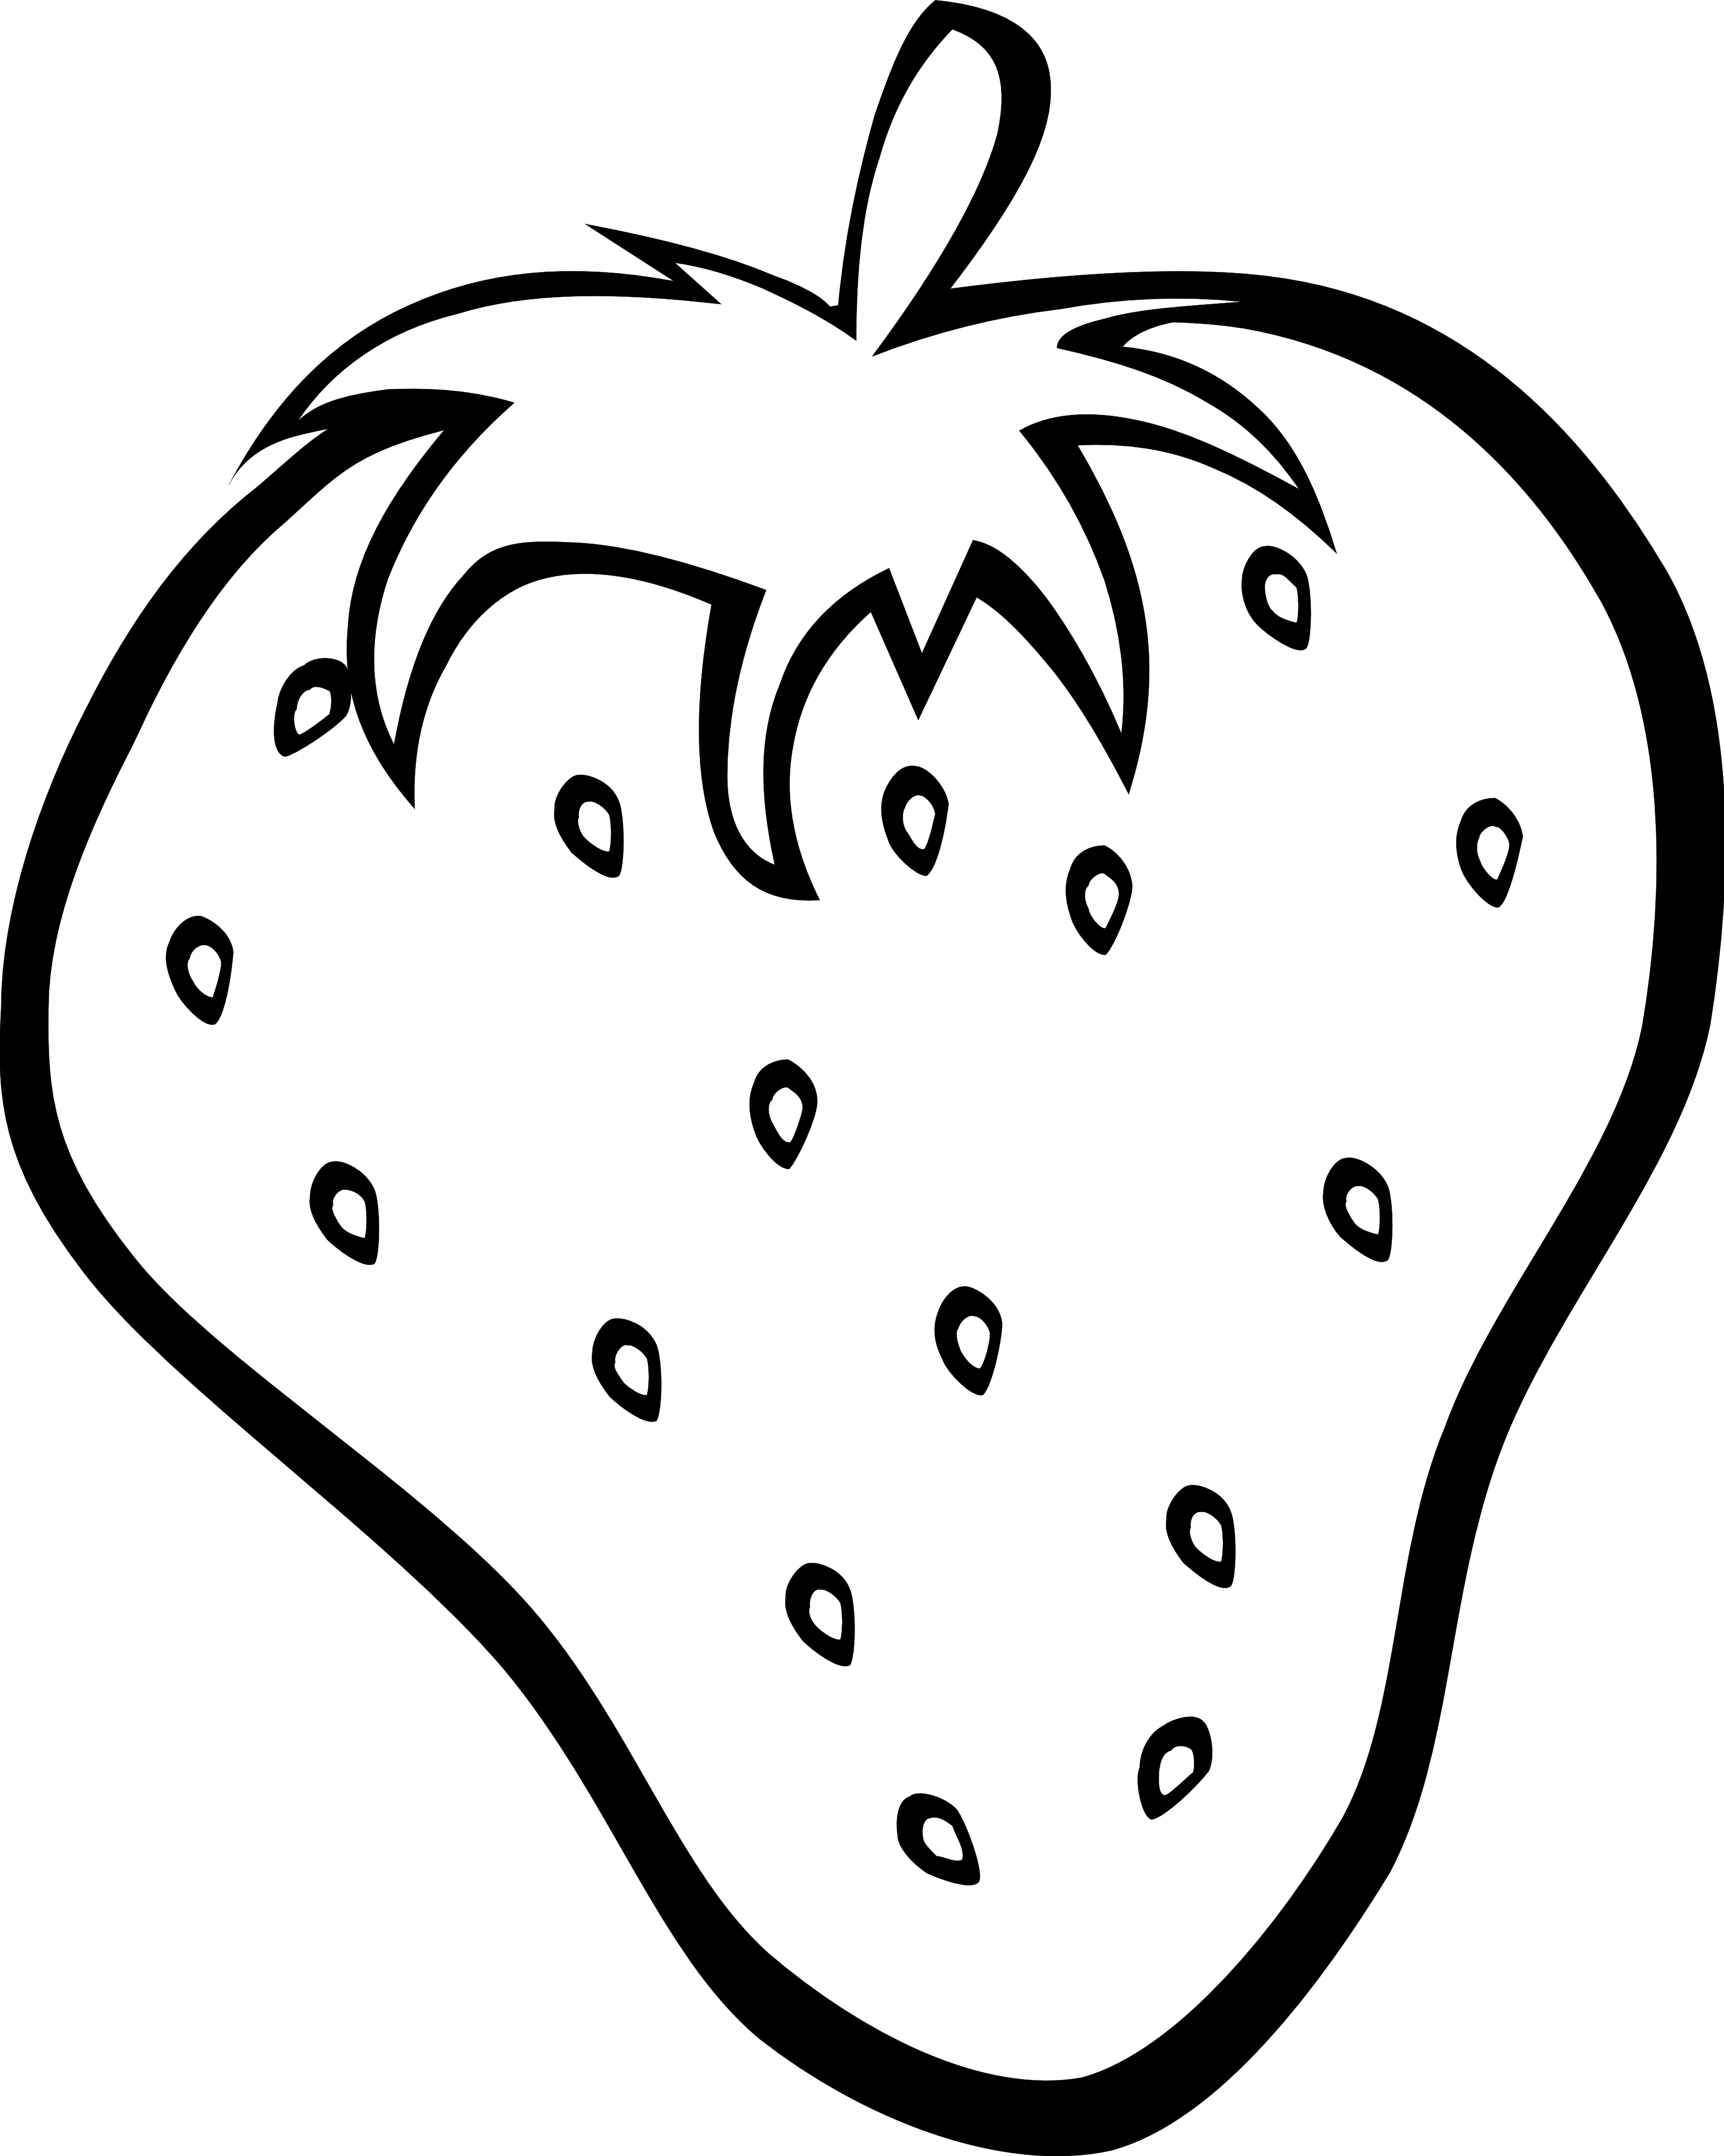 Fruit Drawings - Viewing - Free Clipart Images